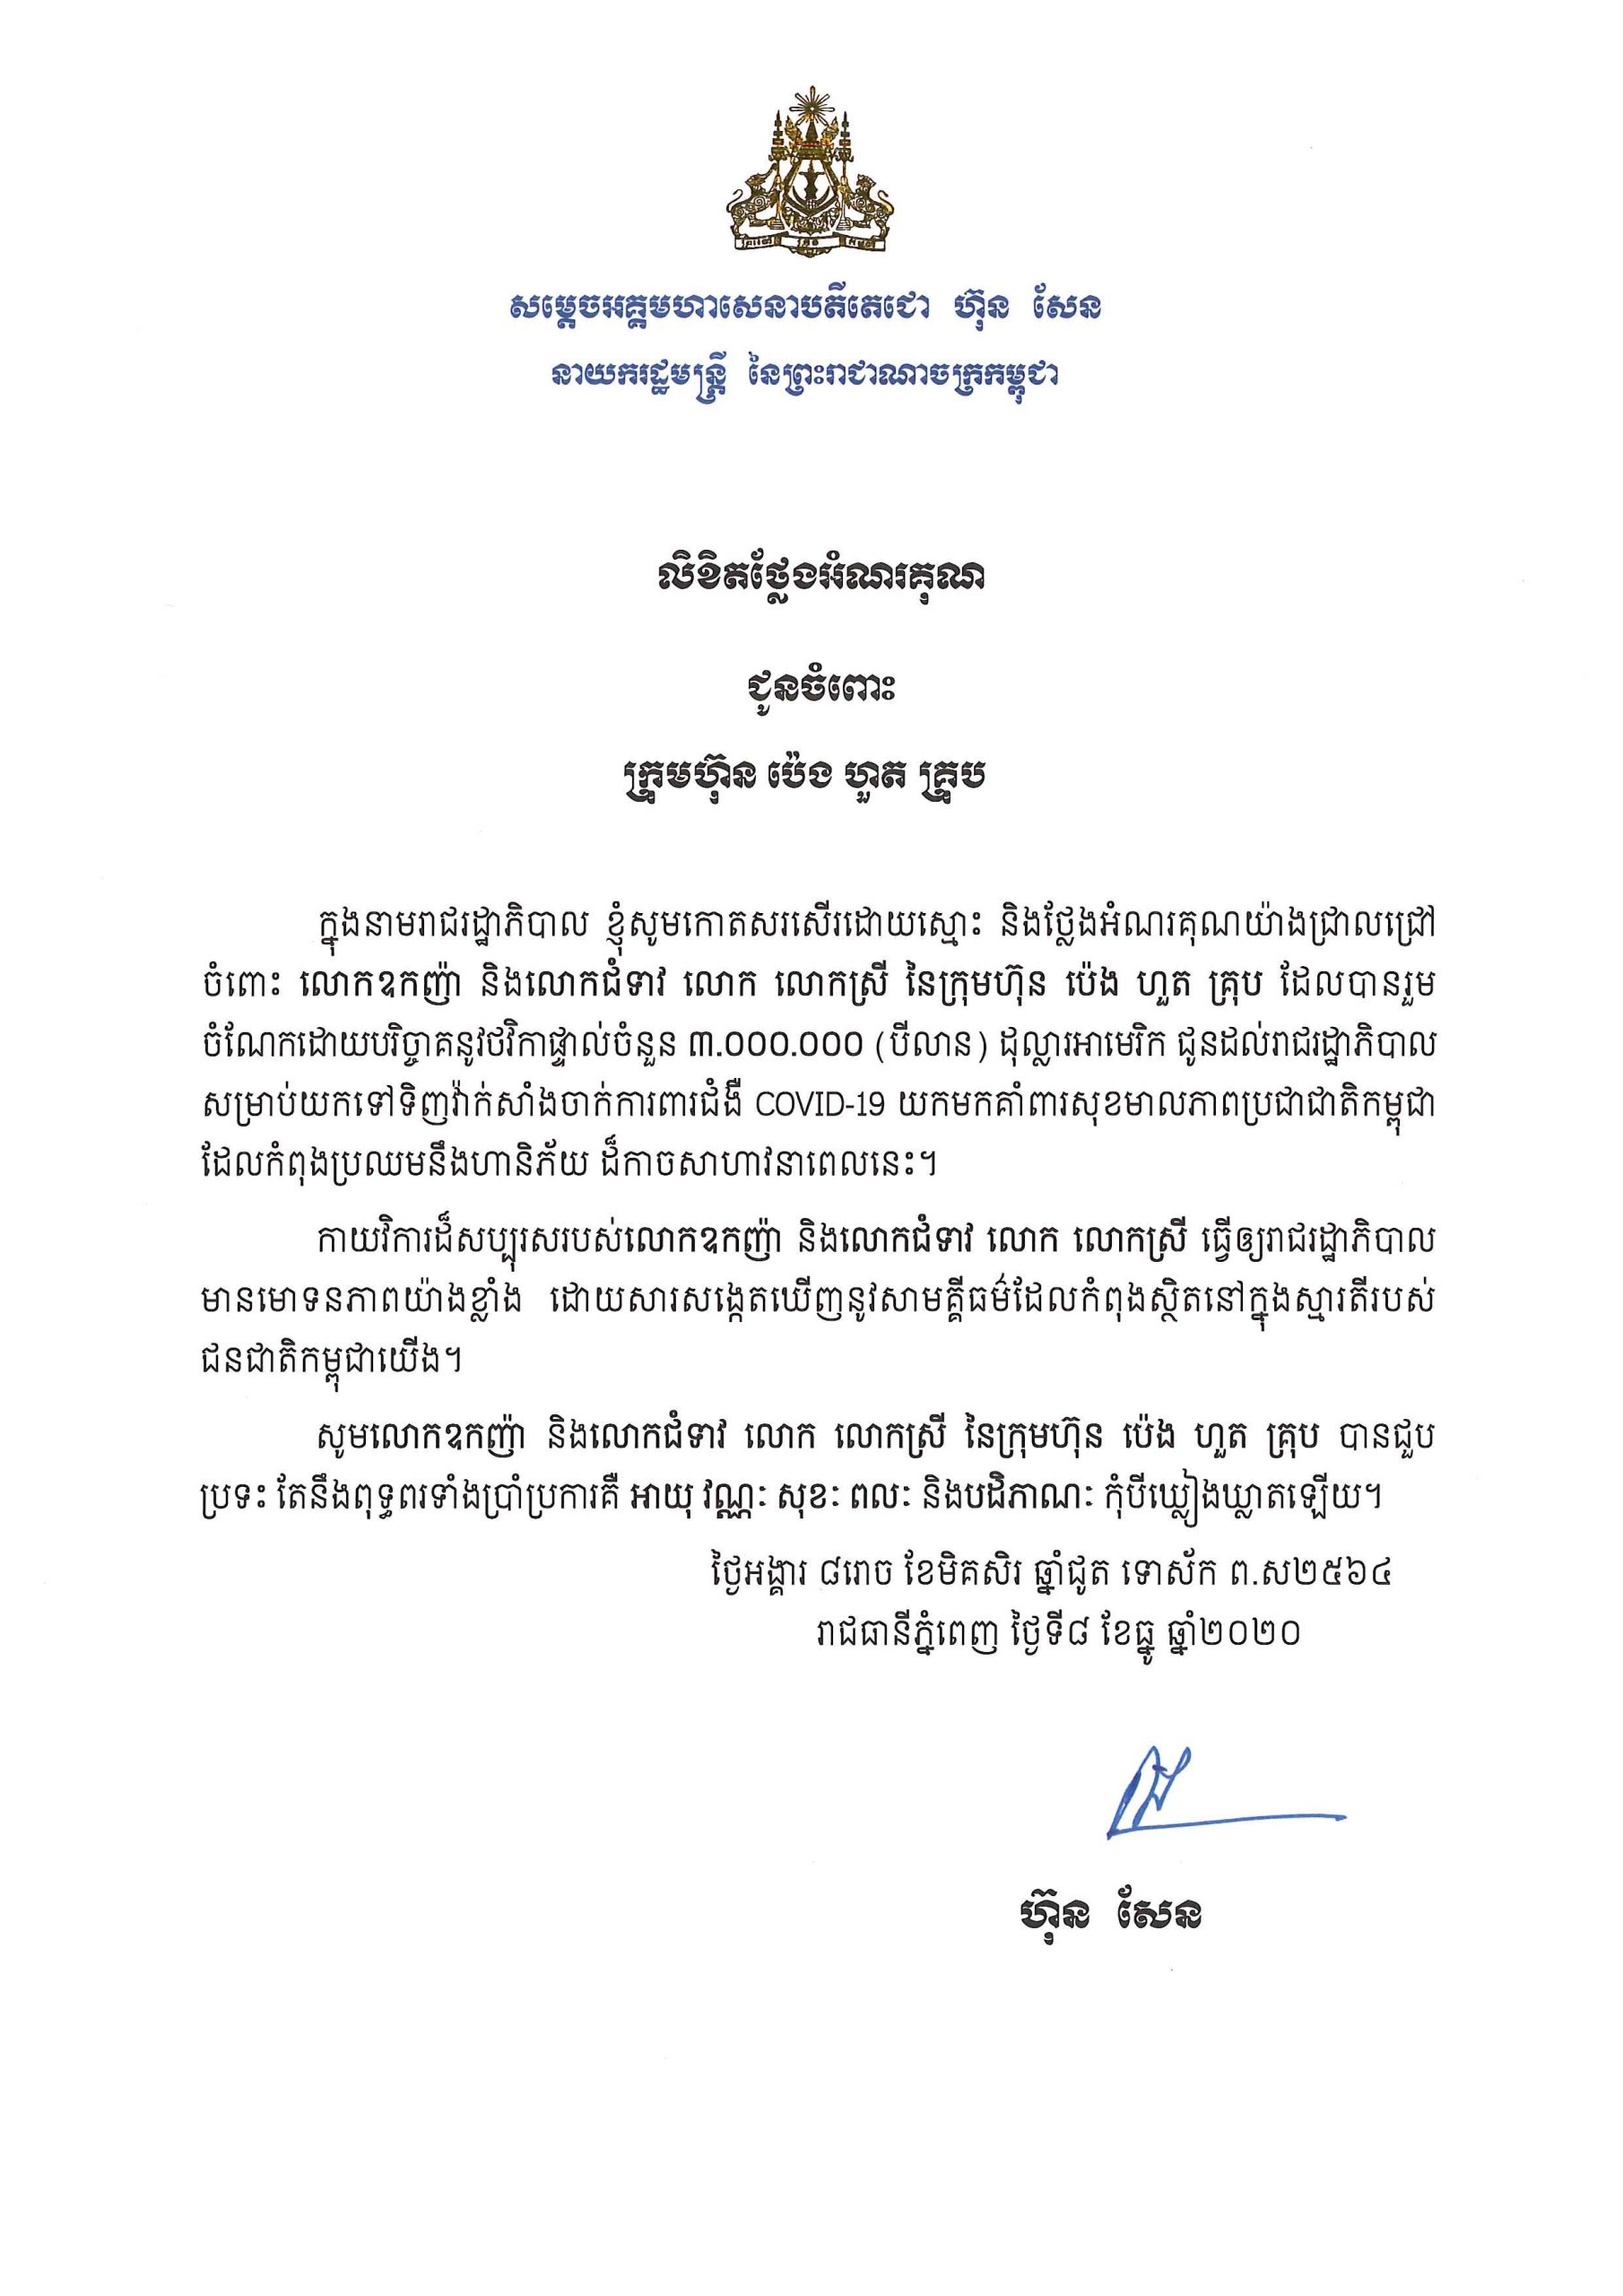 Certificate of Appreciation from Royal Government of Cambodia for the 1st doantion of USD 3 million to purchase Covid-19 vaccine